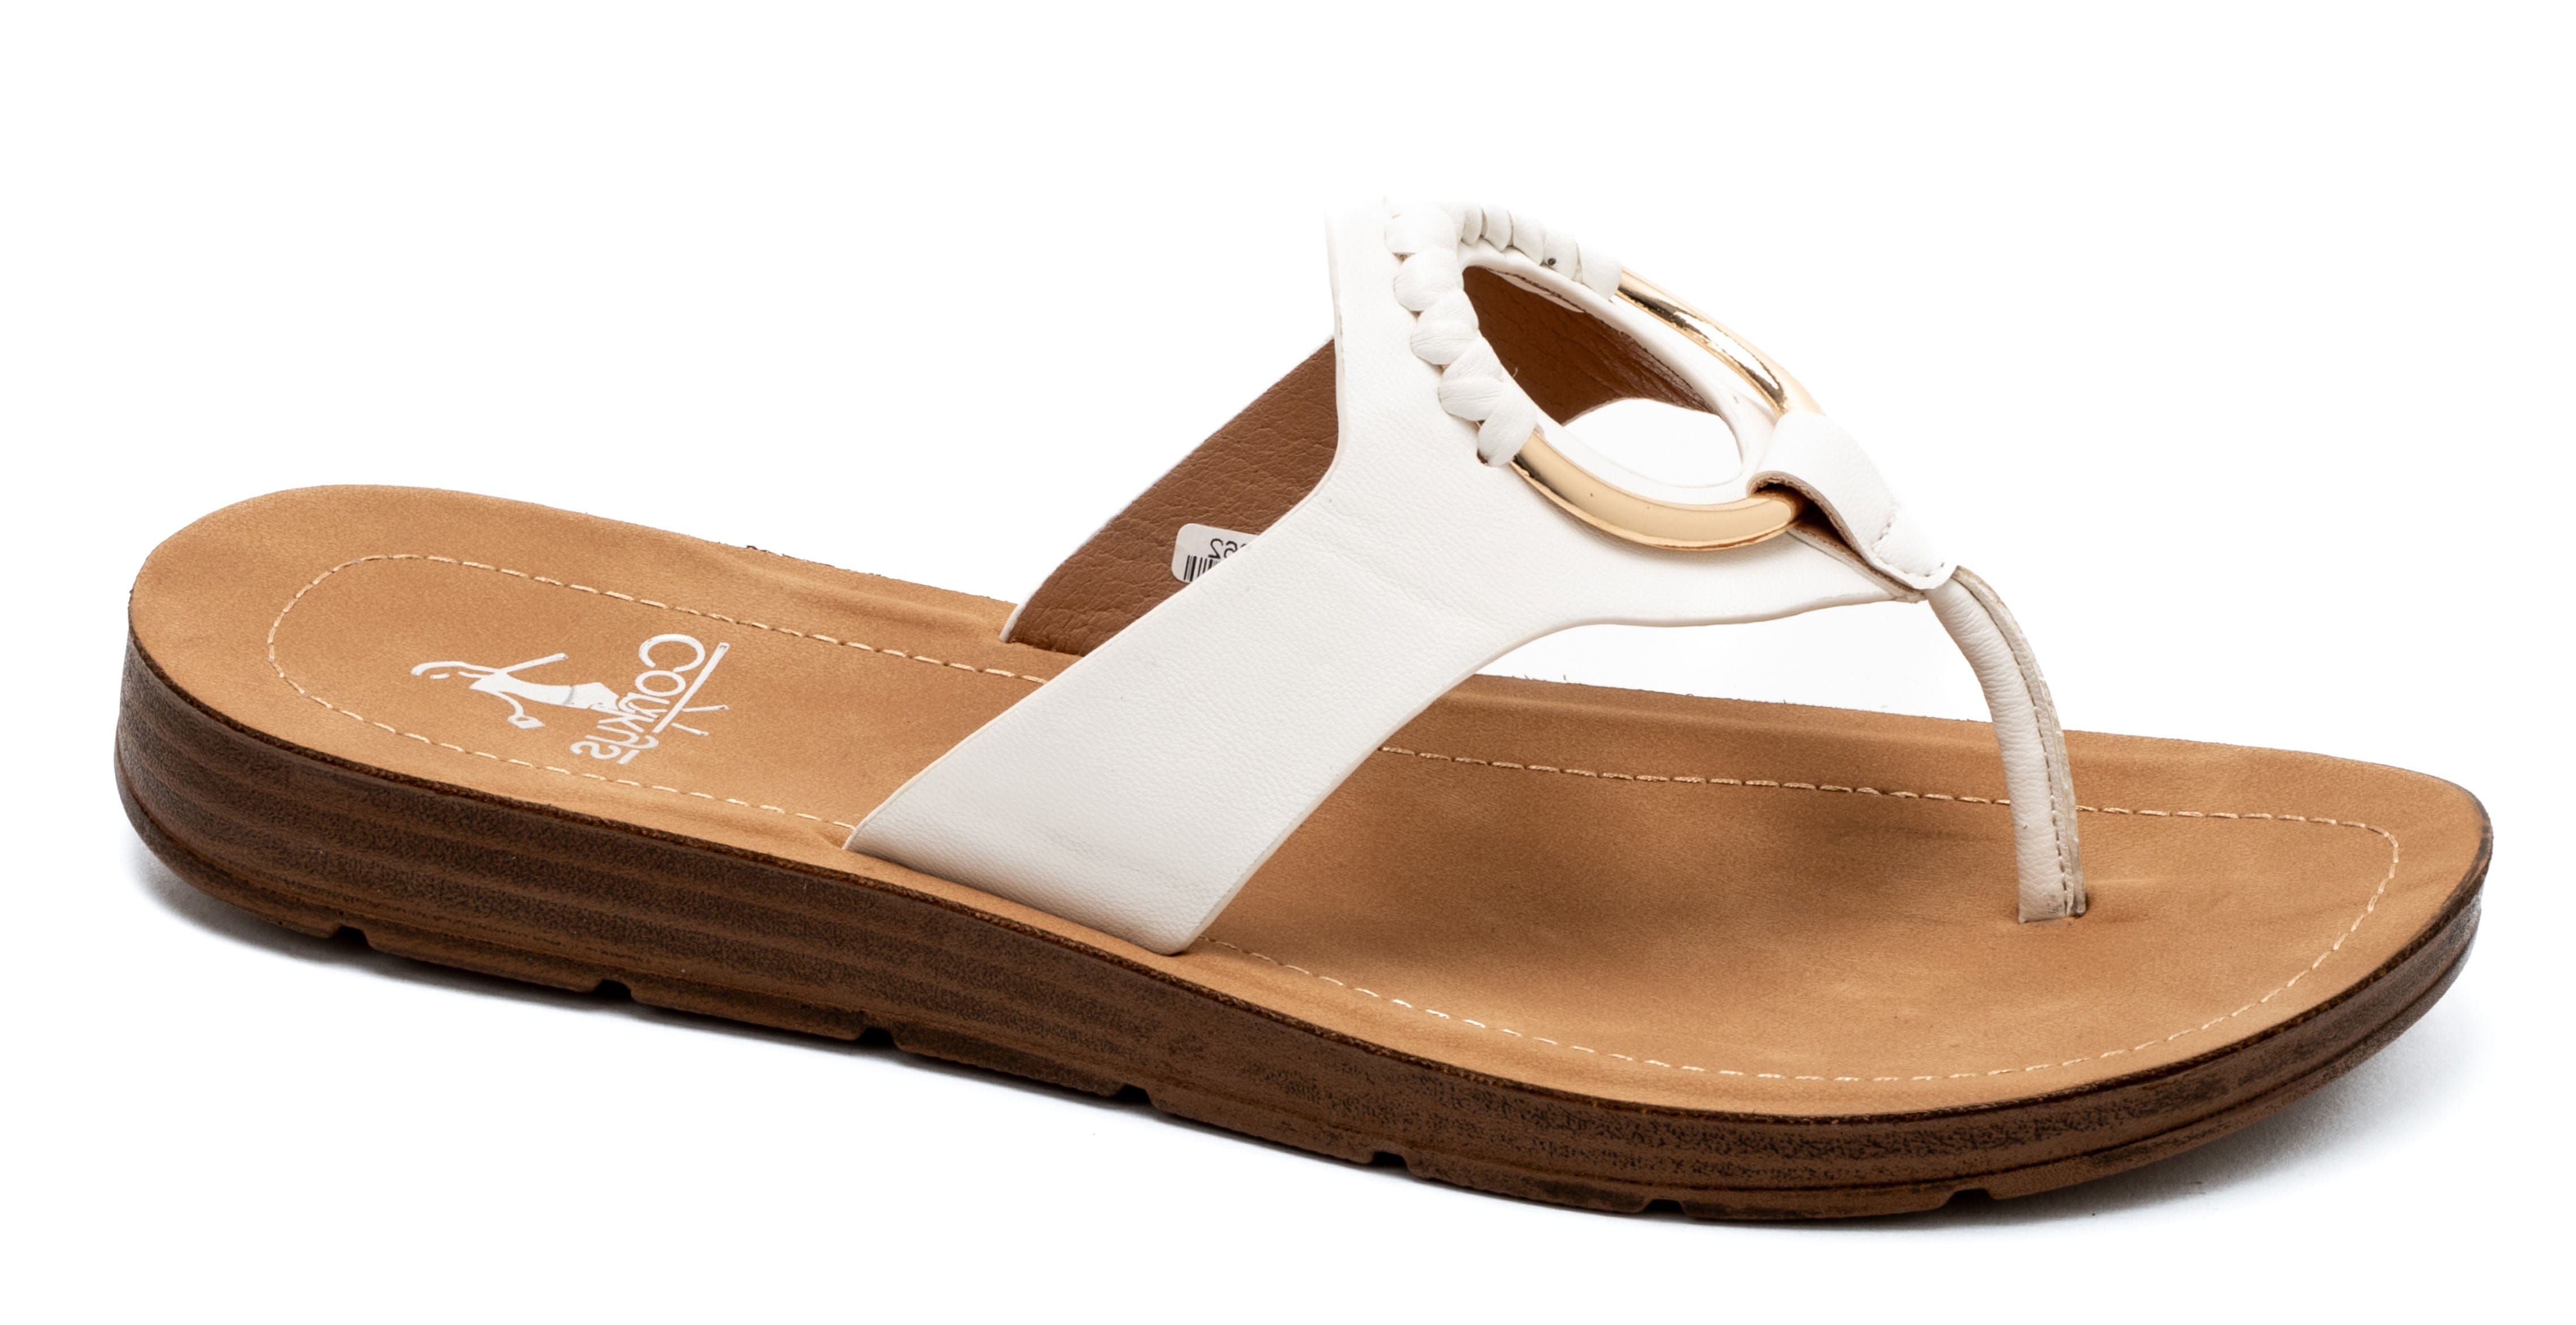 Corkys Ring My Bell Sandals In White - Infinity Raine